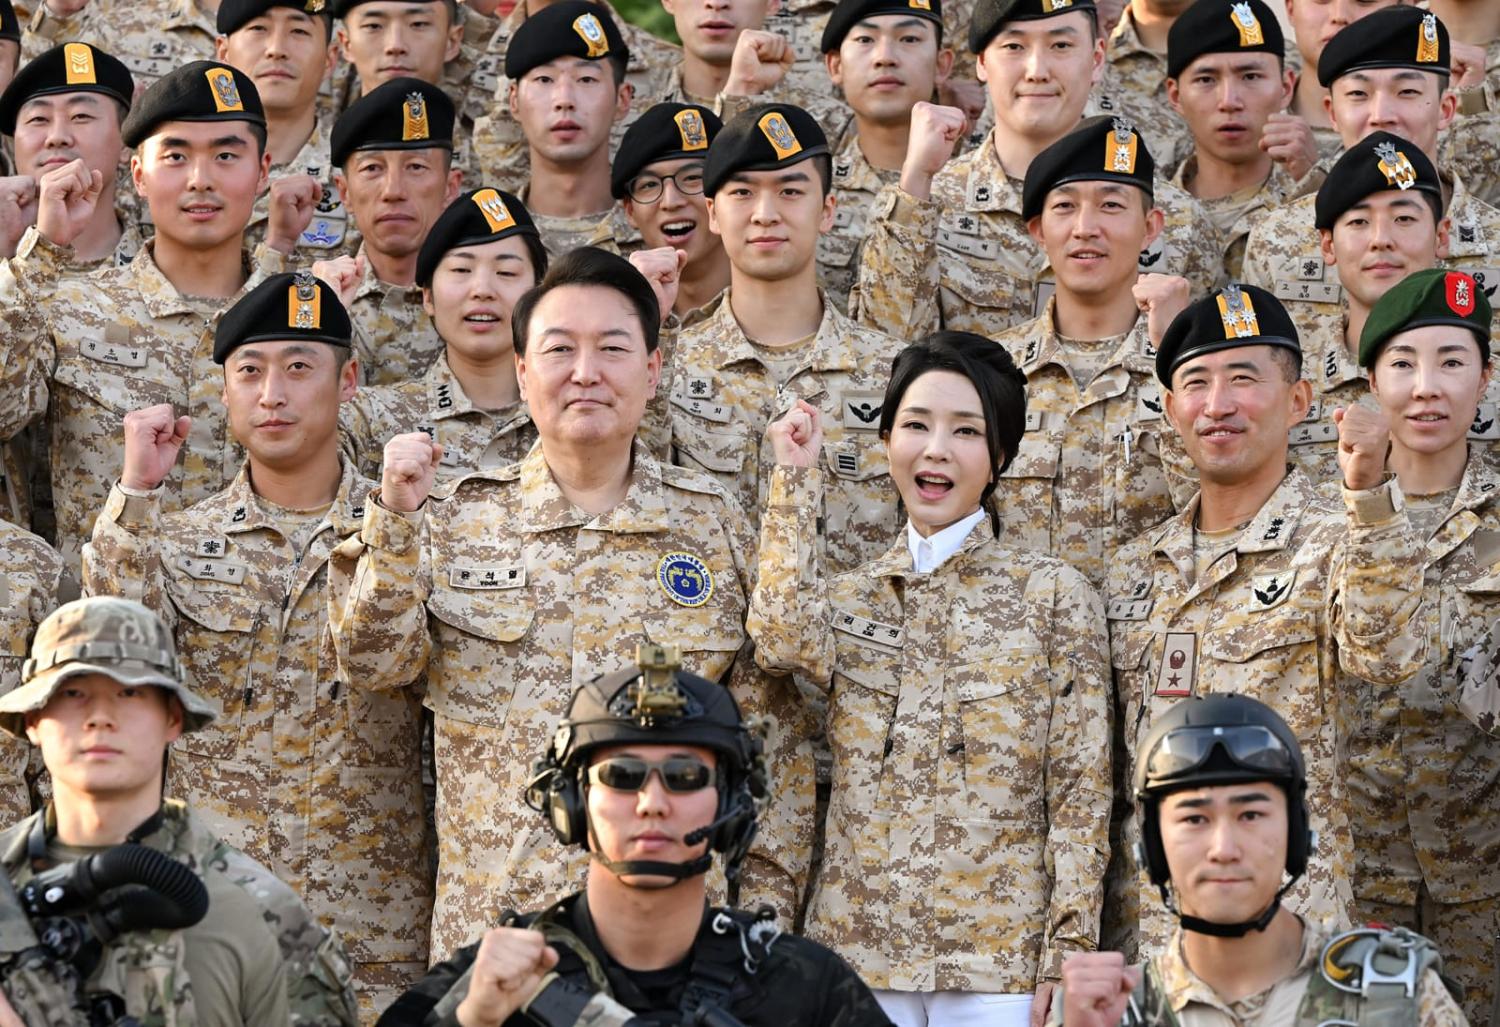 President Yoon Suk-yeol, second left, second row, meets South Korean troops of the Akh unit in UAE on 15 January 2023 (Republic of Korea/Flickr)